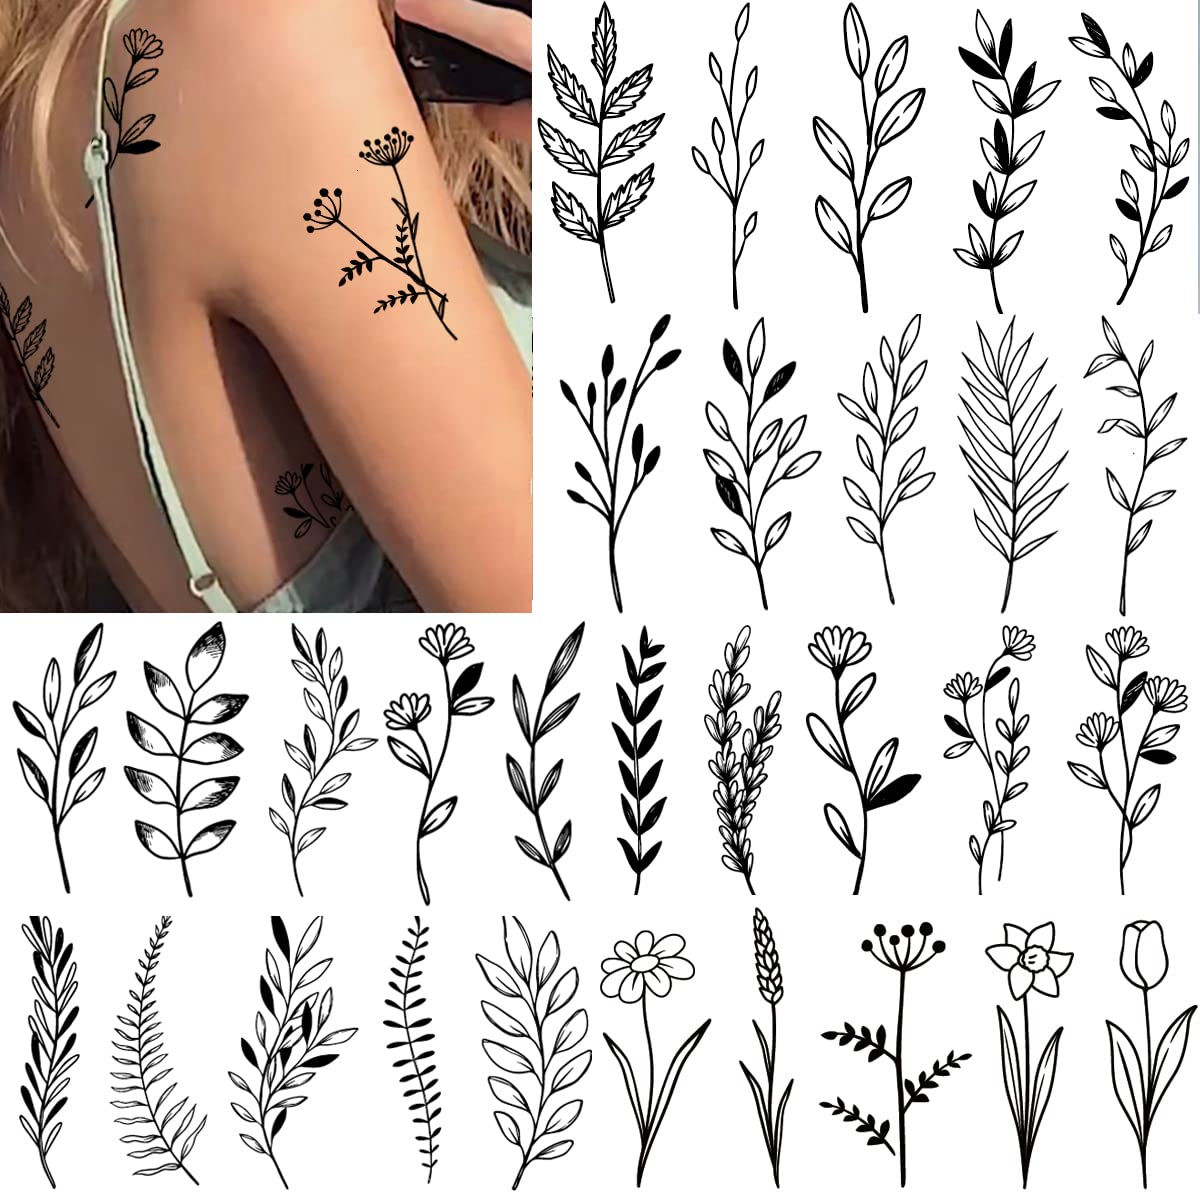 JOEHAPY 19 Sheets Realistic Sexy Flower Temporary Tattoos For Women Neck  Arm Girls Black Waterproof Small Fake Tattoo Sticker Tiny Branch Floral  Sunflower Wild Plants Sketch Tatoo Sets Kits For Adults :